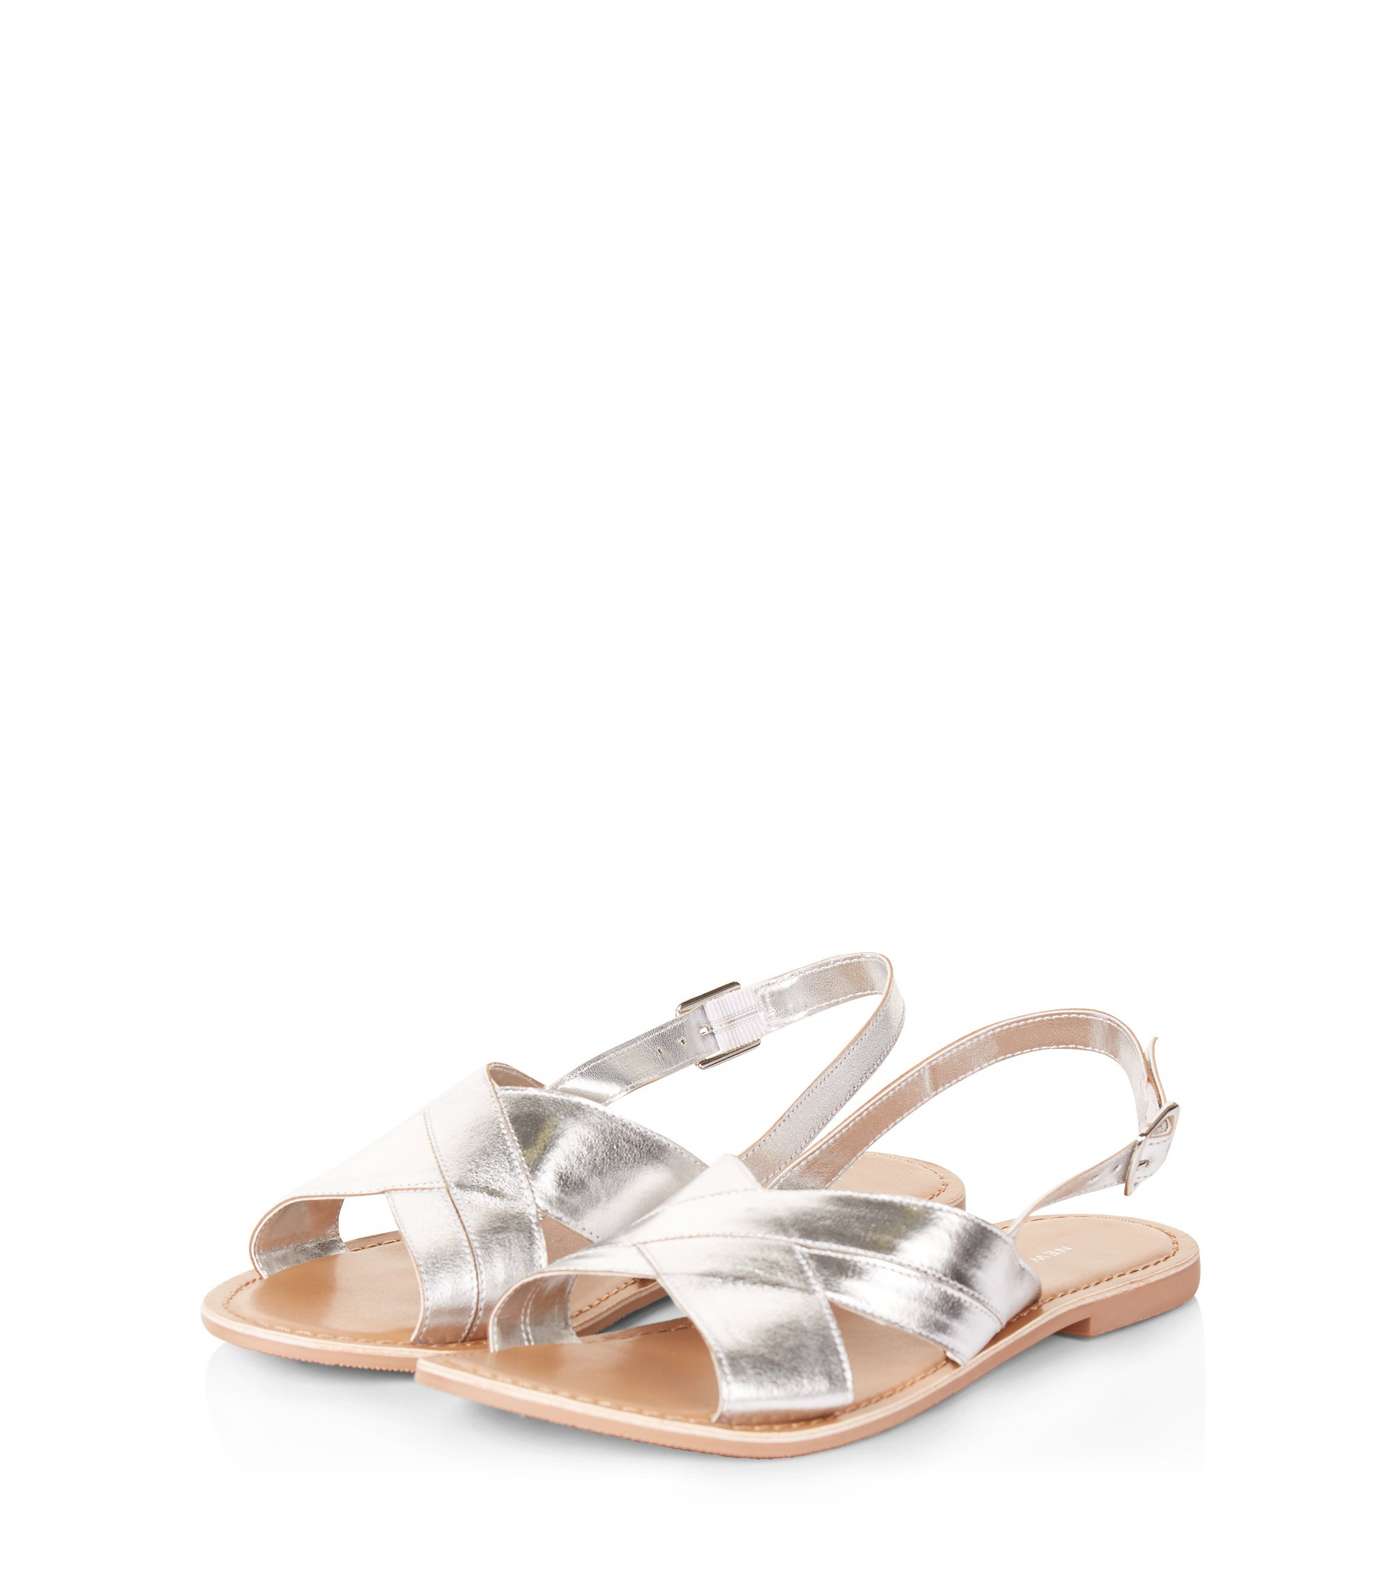 Silver Leather Cross Strap Slingback Sandals Image 3